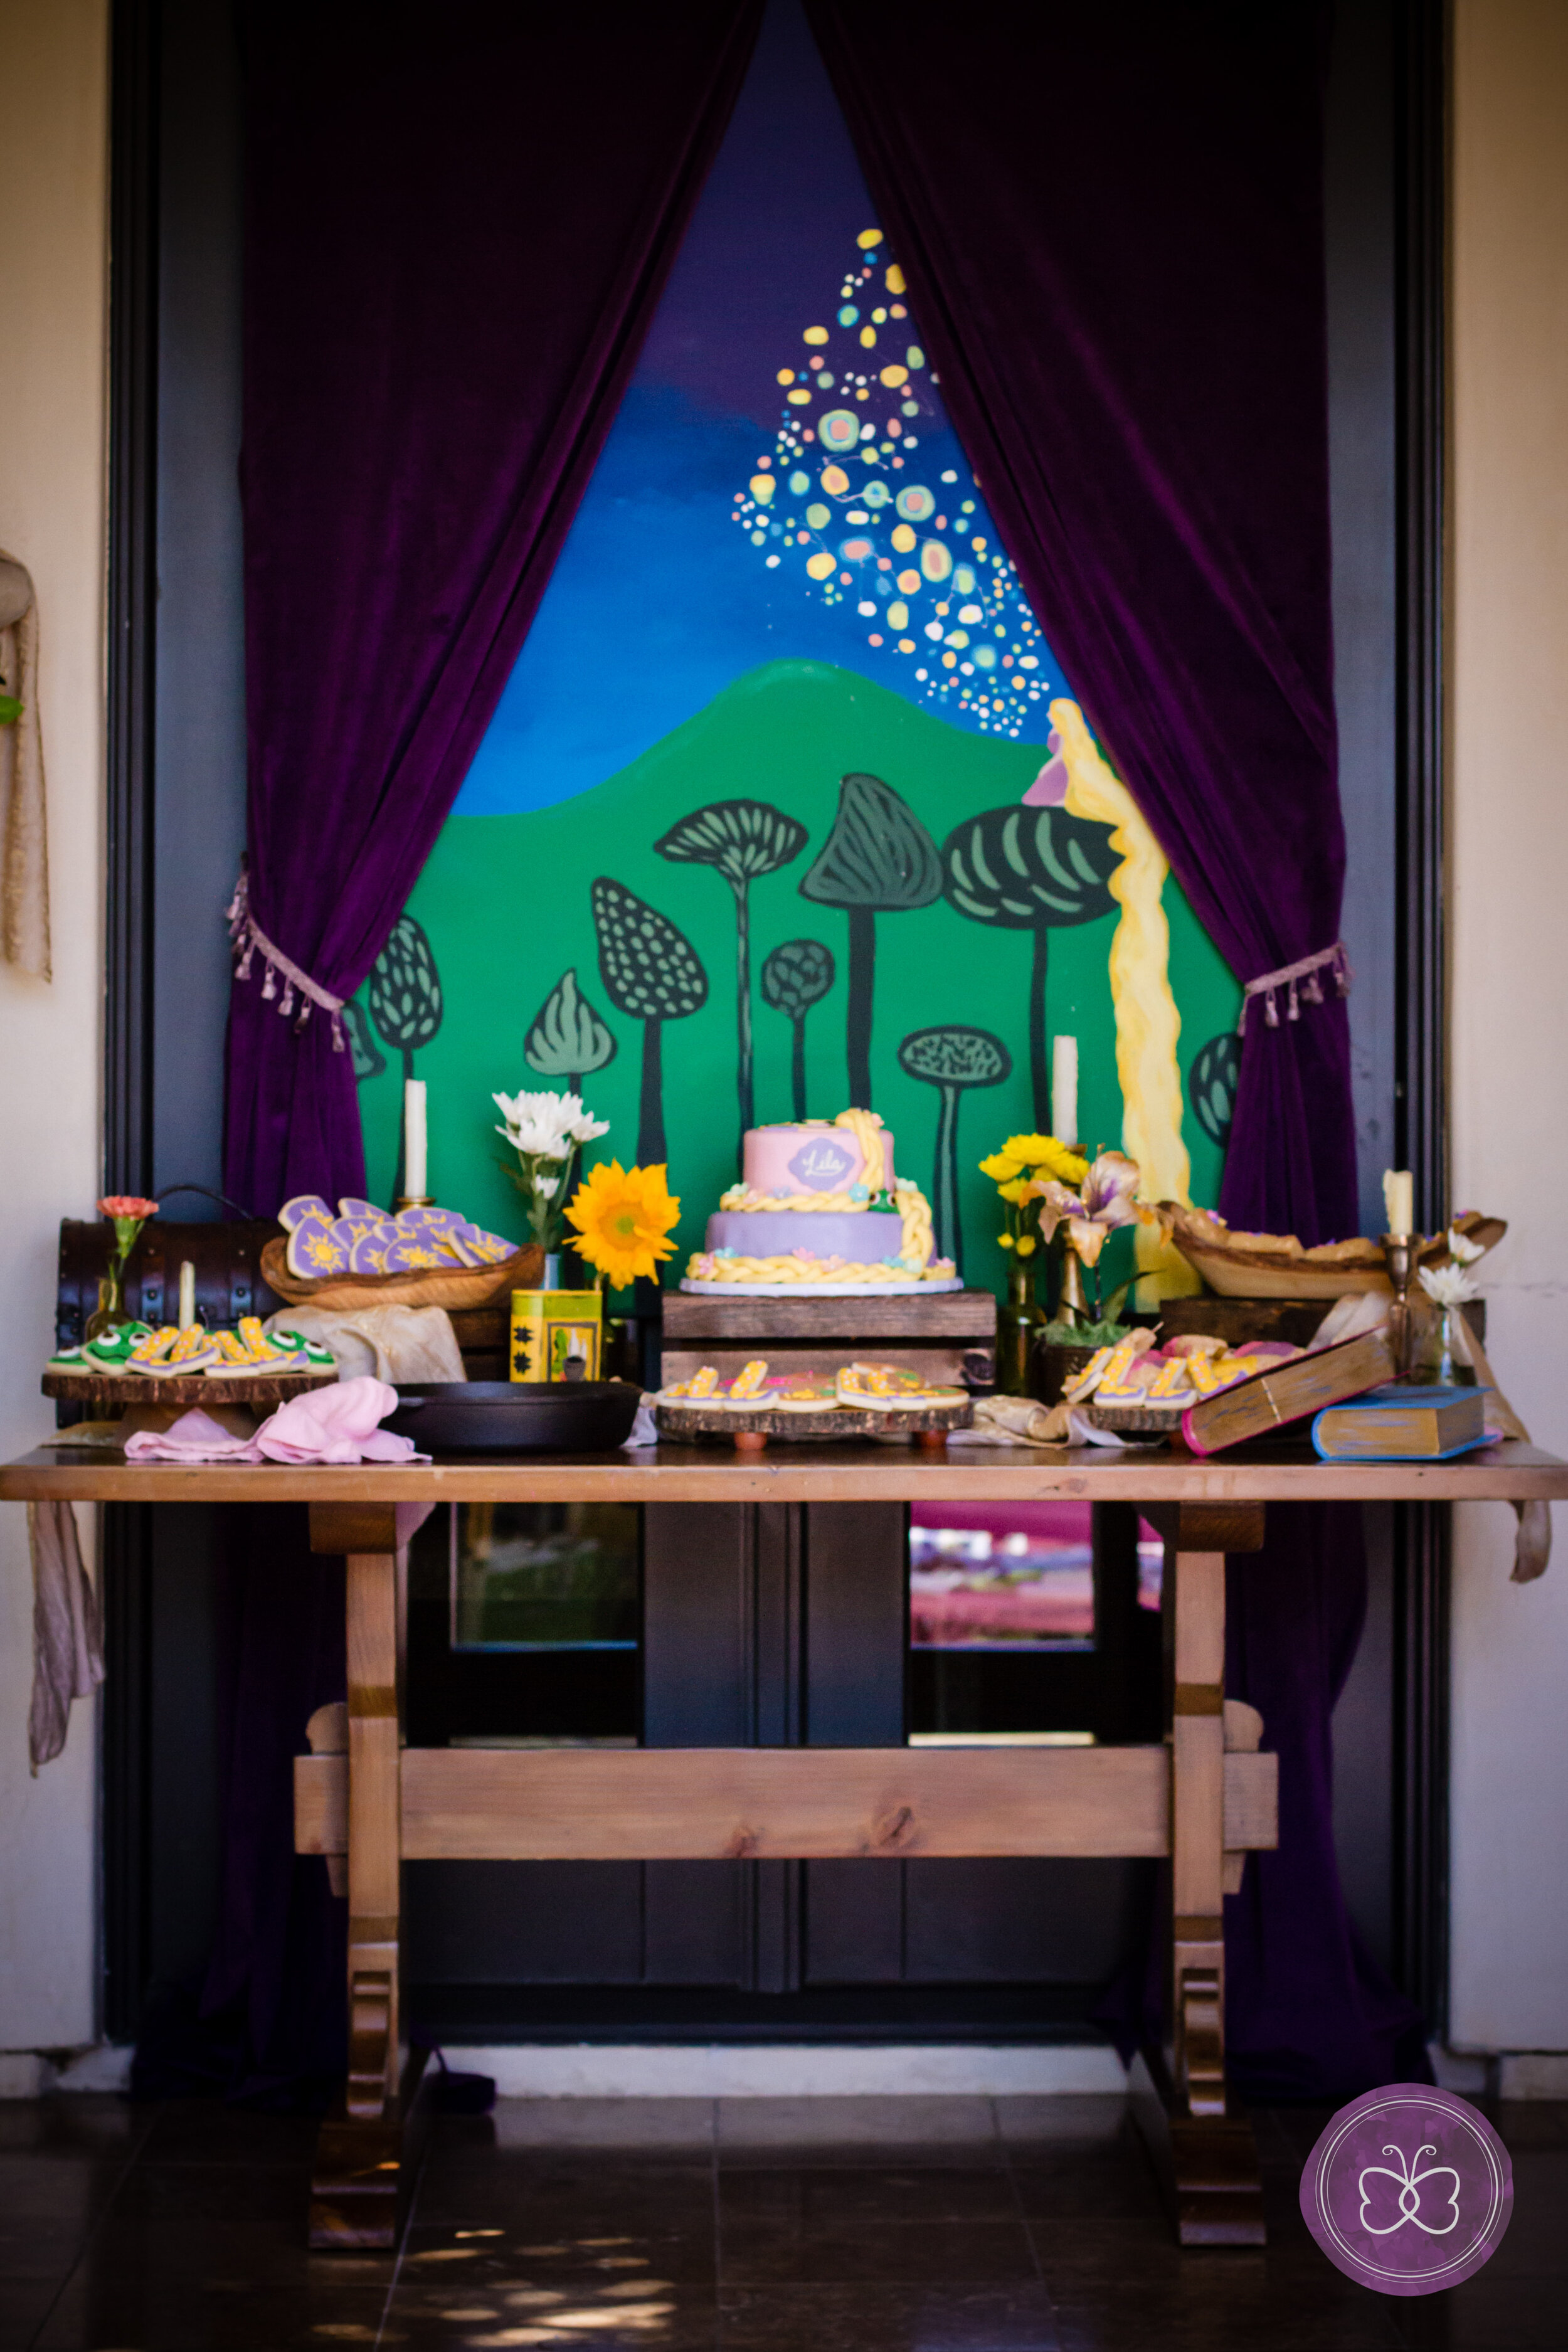 Lila's Rustic Tangled Party — Papillons Entertainment + Events